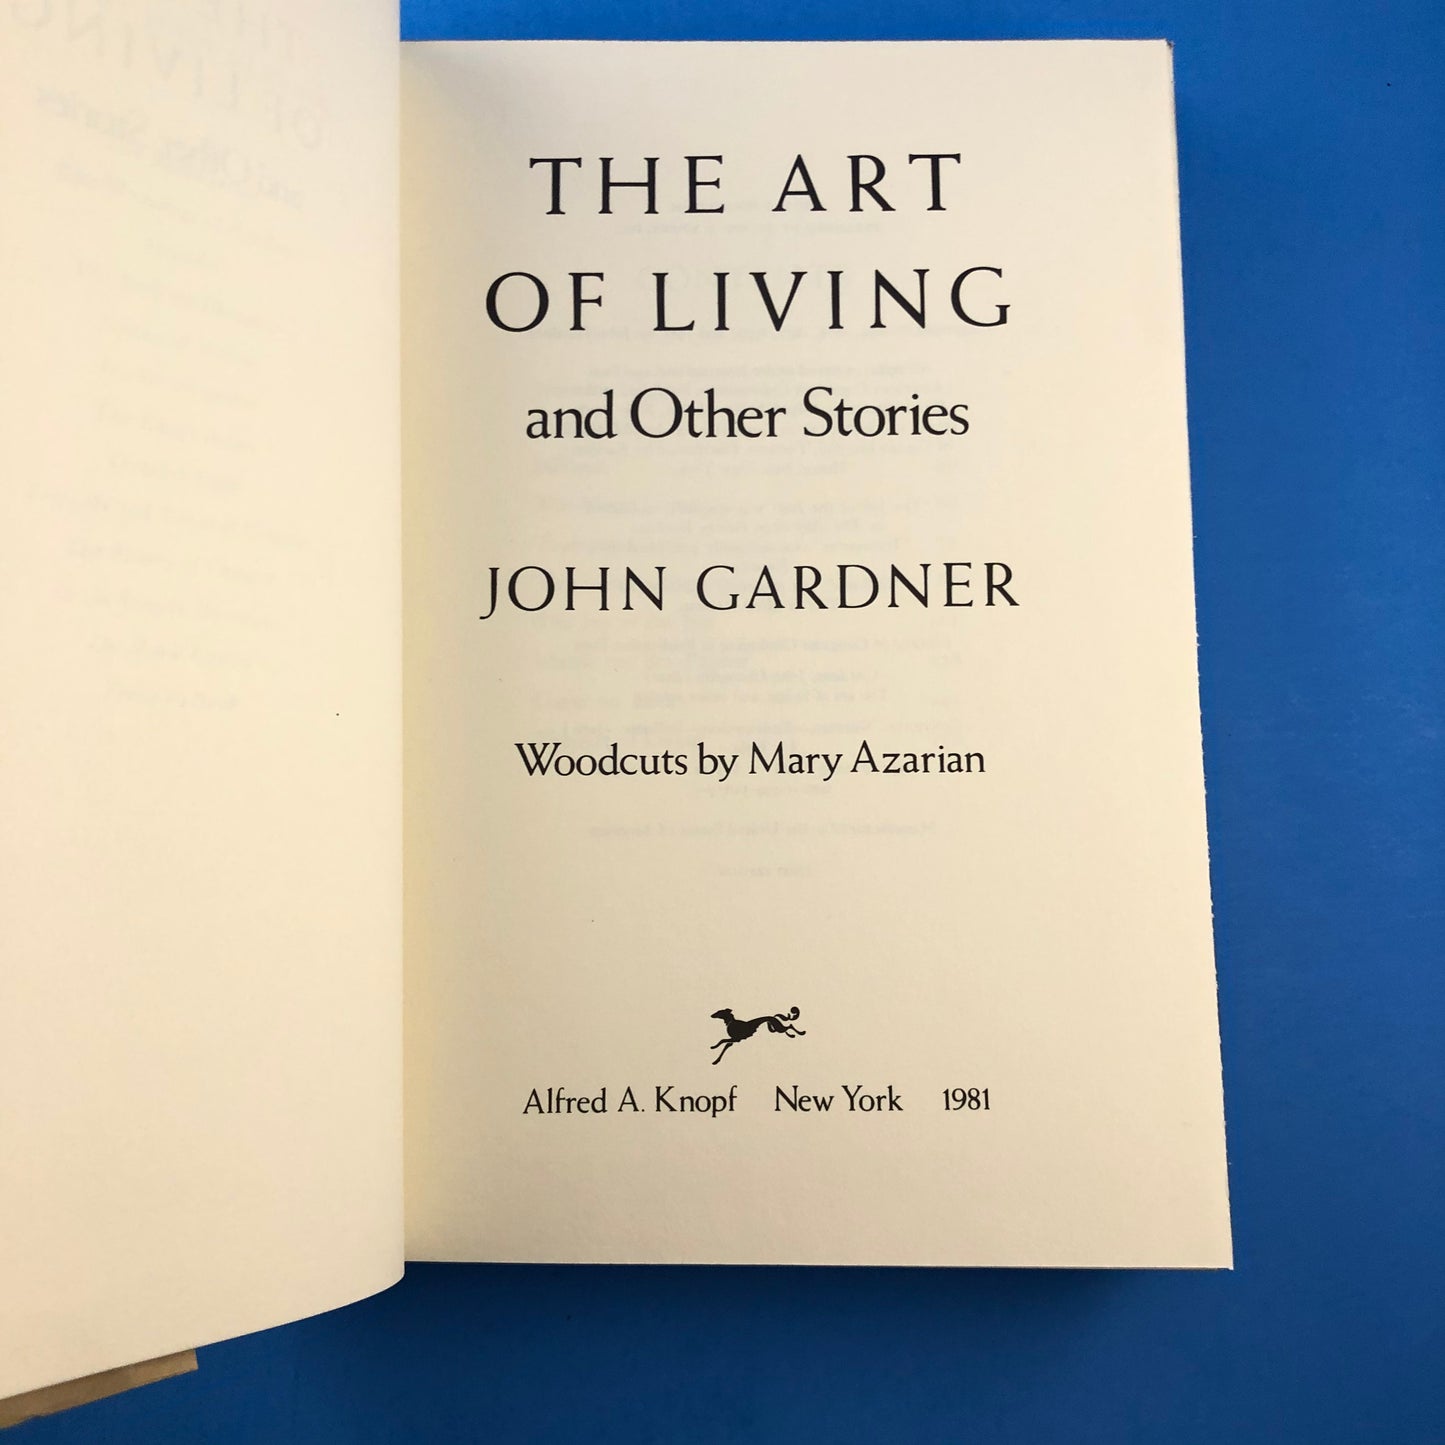 The Art of Living and Other Stories